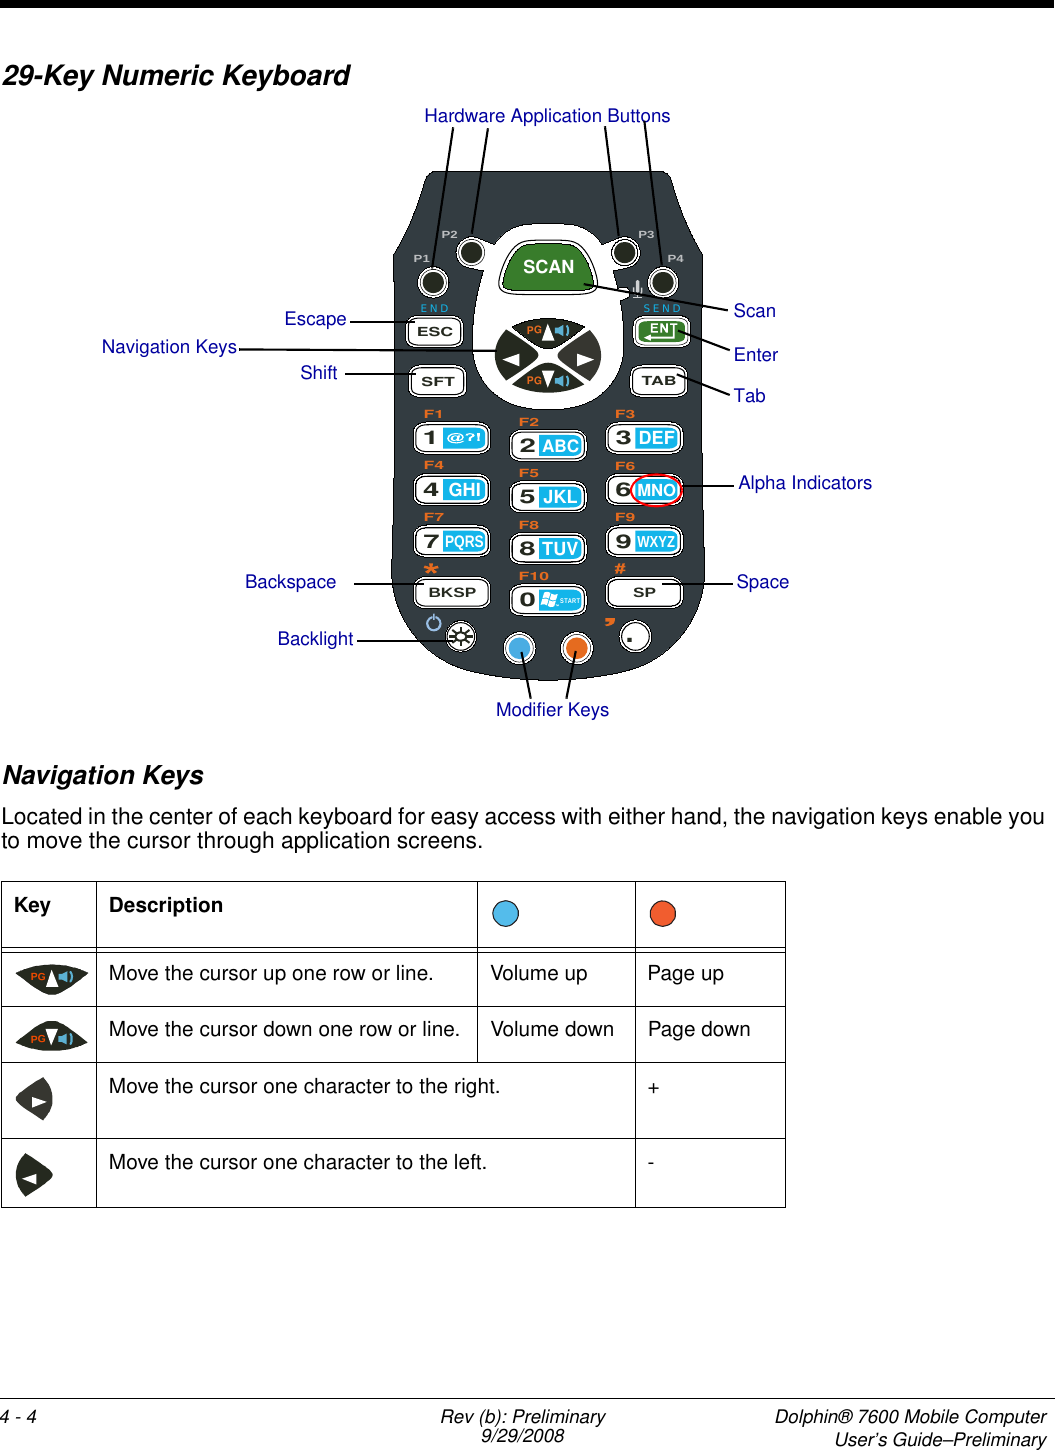 4 - 4 Rev (b): Preliminary9/29/2008  Dolphin® 7600 Mobile ComputerUser’s Guide–Preliminary29-Key Numeric Keyboard Navigation KeysLocated in the center of each keyboard for easy access with either hand, the navigation keys enable you to move the cursor through application screens.Key DescriptionMove the cursor up one row or line. Volume up Page upMove the cursor down one row or line. Volume down Page downMove the cursor one character to the right. +Move the cursor one character to the left. -F1F2 F3F4 F5 F6F7 F8 F9F10P1P2 P3P4END SENDSCANPGPG.1ESCSFT TABGHI47PQRSBKSP0STARTSP8TUVJKL52ABC9WXYZ6MNODEF3BacklightModifier KeysEscapeNavigation KeysTab Shift EnterScanHardware Application ButtonsBackspace SpaceAlpha IndicatorsPGPG